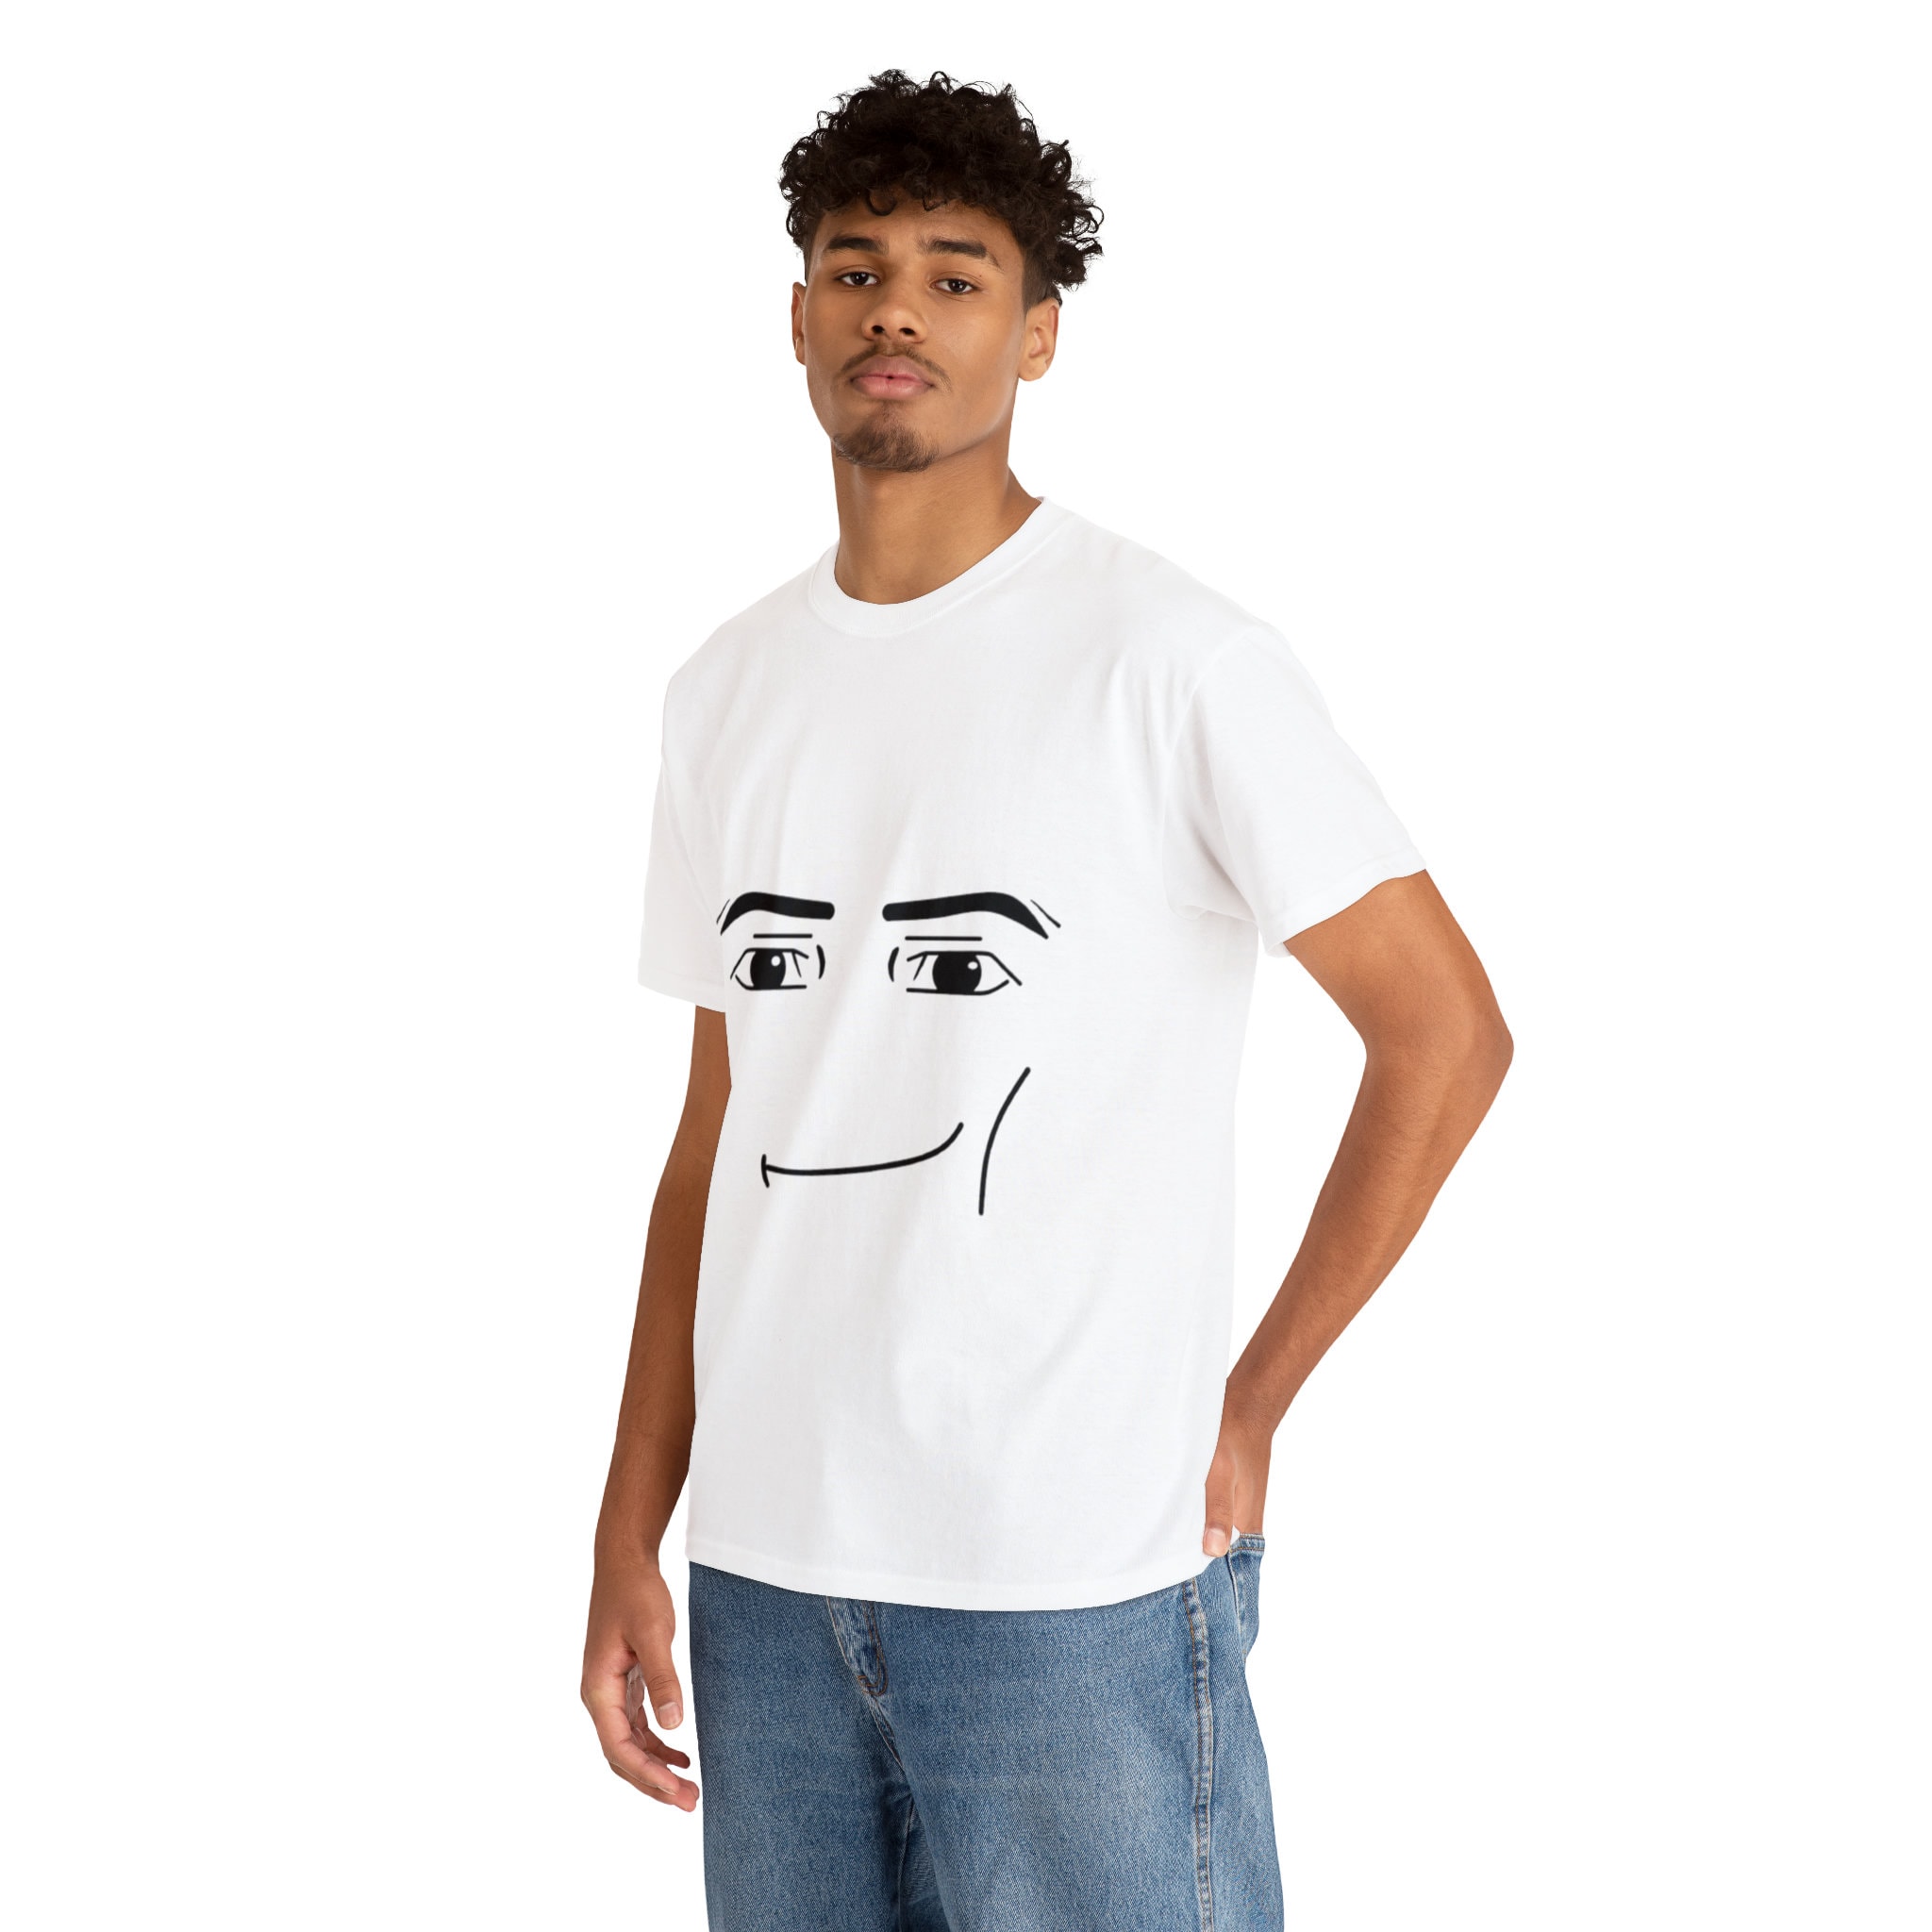 Create meme roblox muscles, press roblox, roblox t shirt muscles -  Pictures 